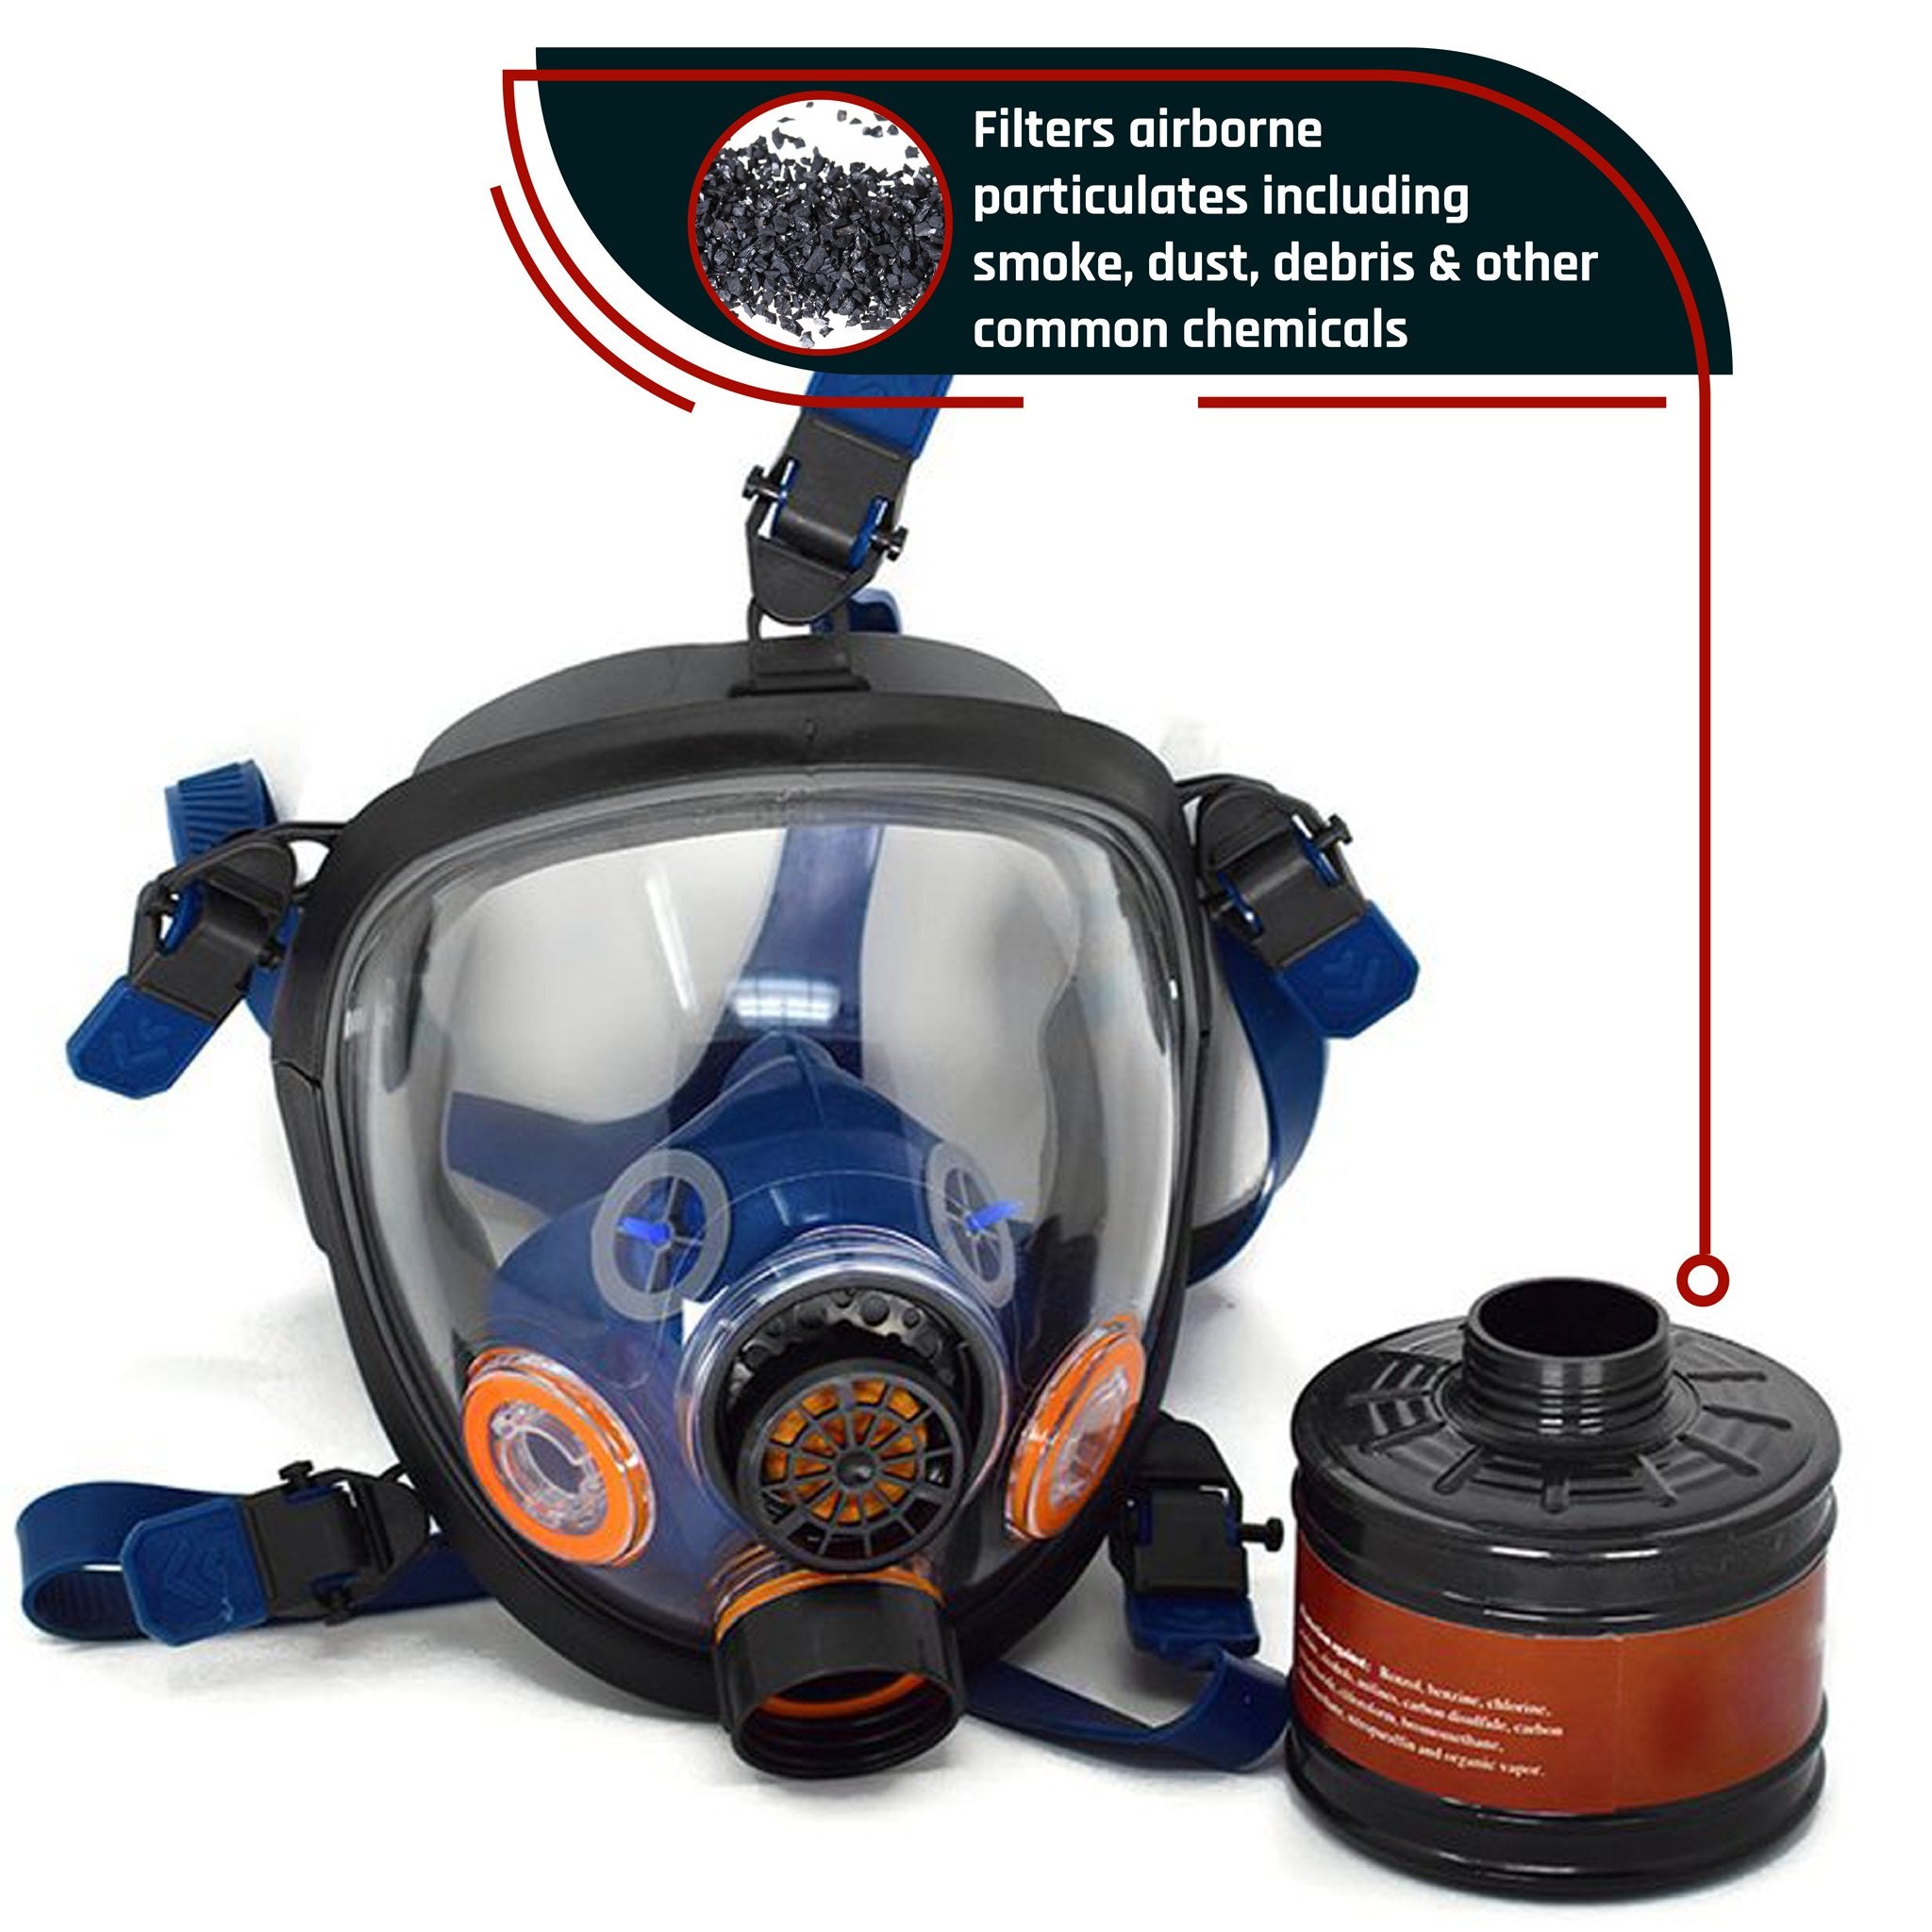 Load image into Gallery viewer, ST - 100X Burnt Bronze Mirrored - Full Face Respirator Gas Mask with Organic Vapor and Particulate Filtration - Parcil SafetyGas MasksGas MasksParcil Safety